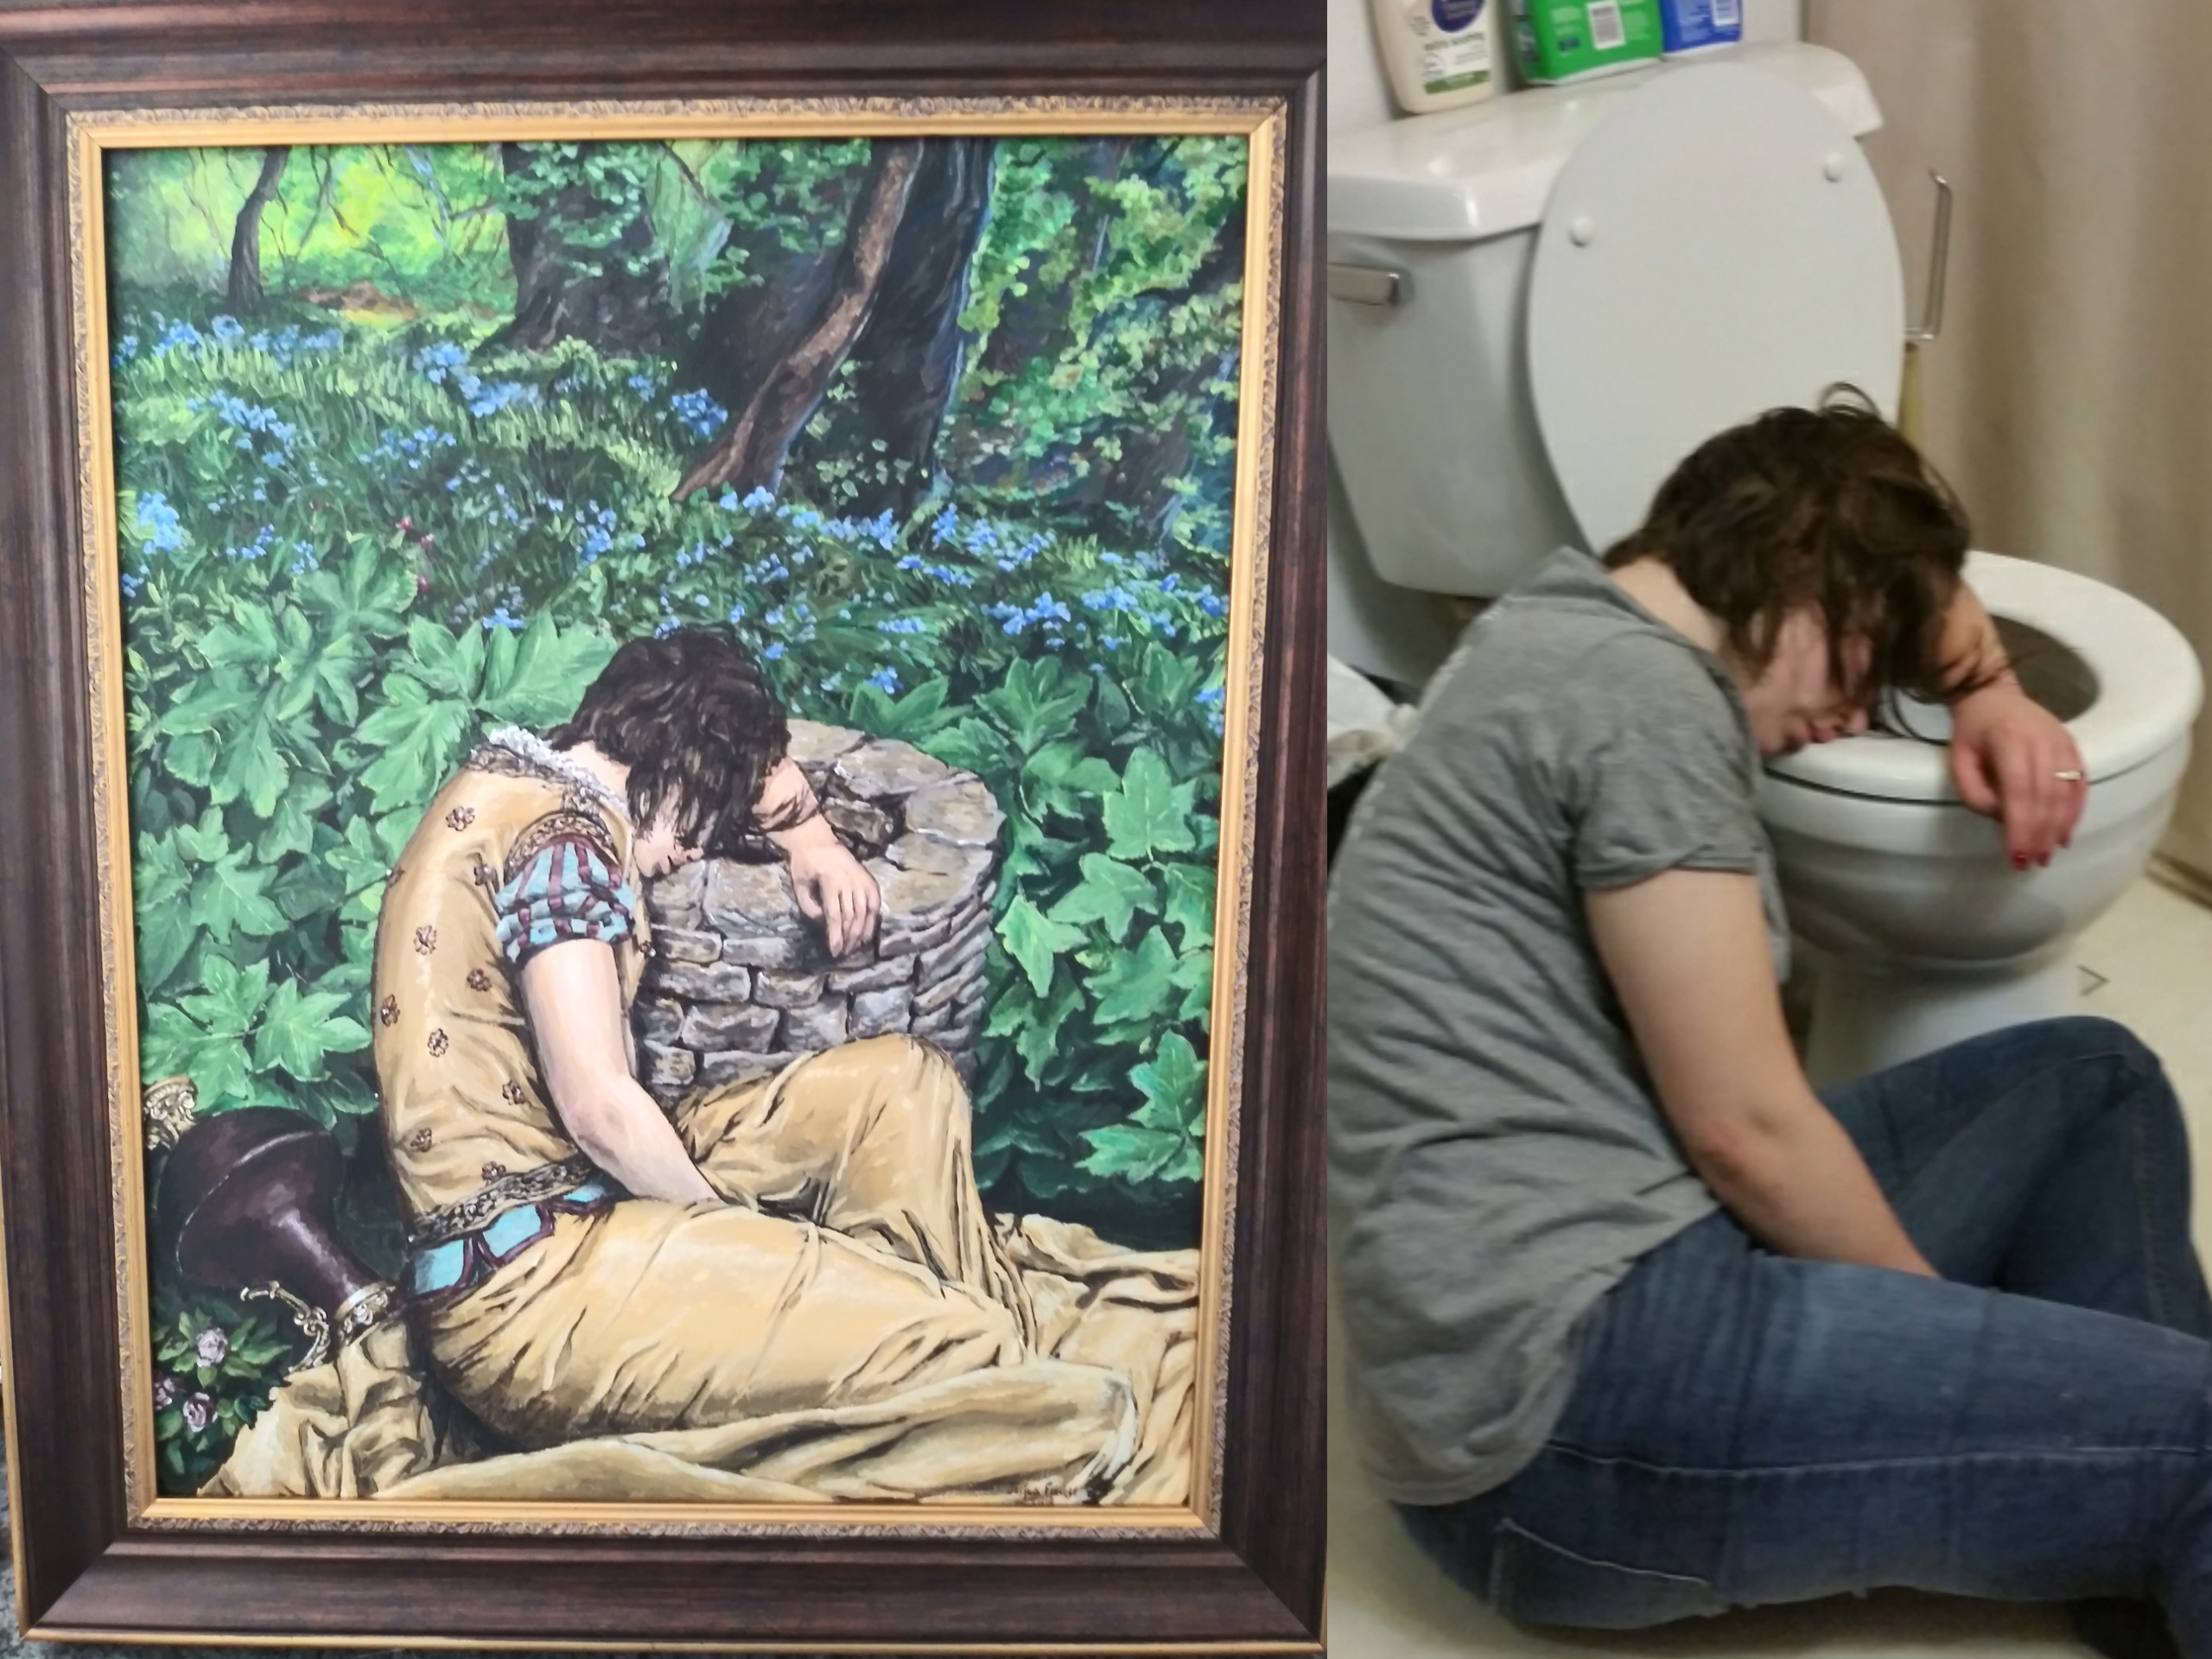 A year ago I got black-out drunk at a charity bar crawl. My best friend commissioned a painting of his favorite photo of me from that night.